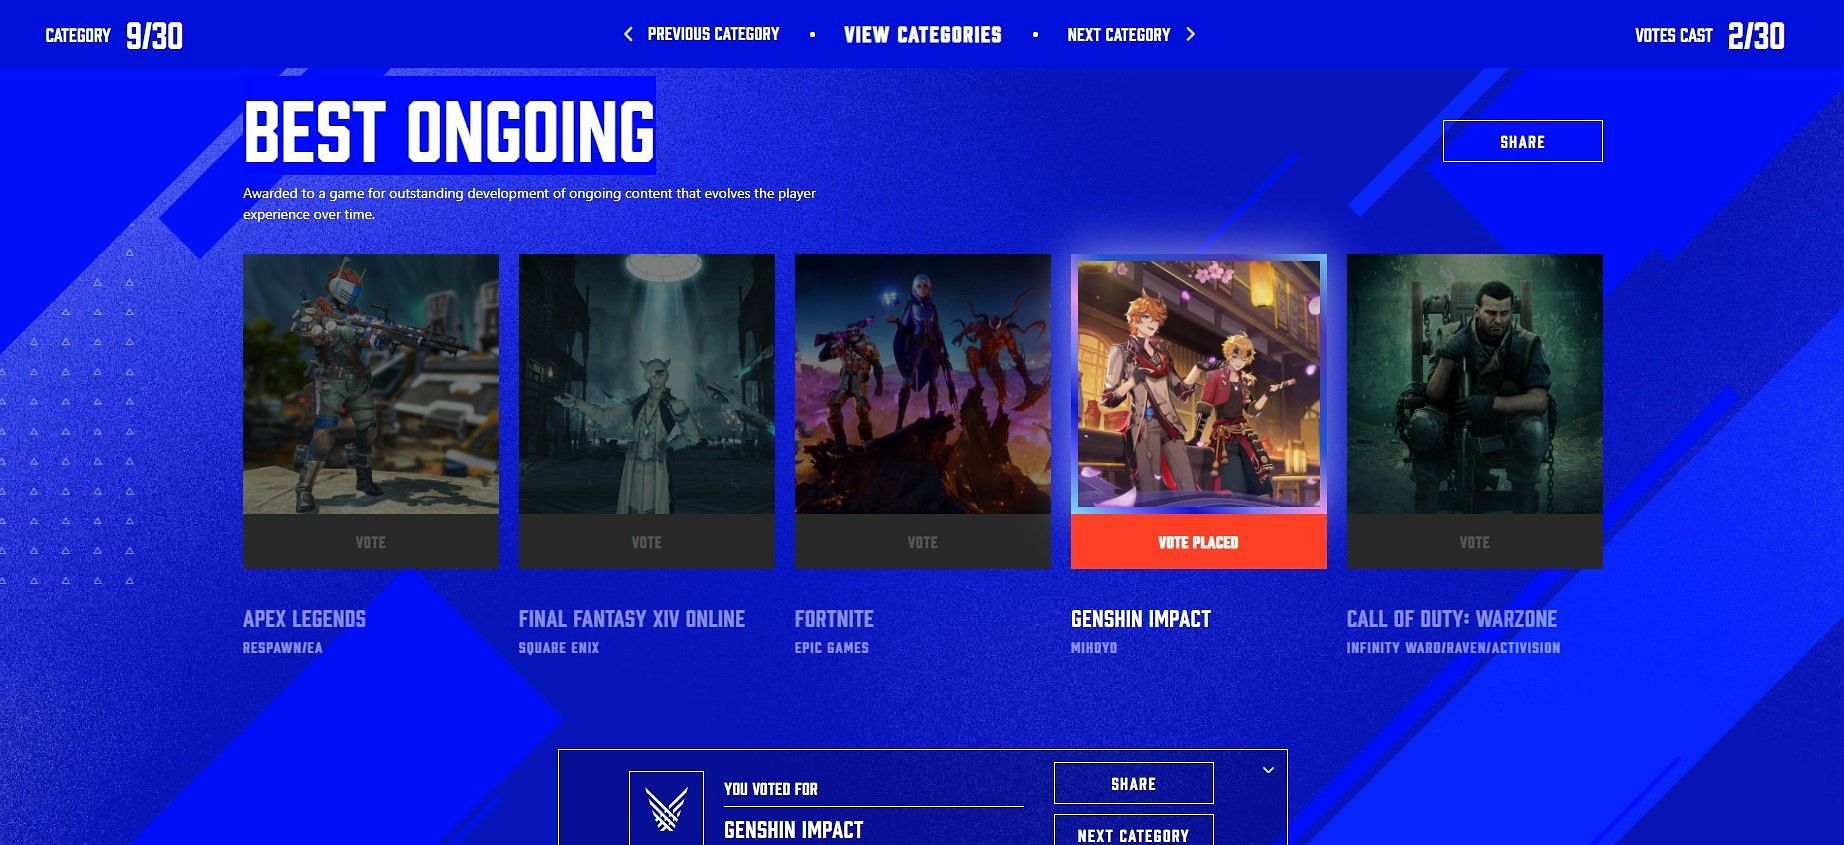 How voting looks like on the website (Image via The Games Awards 2021)